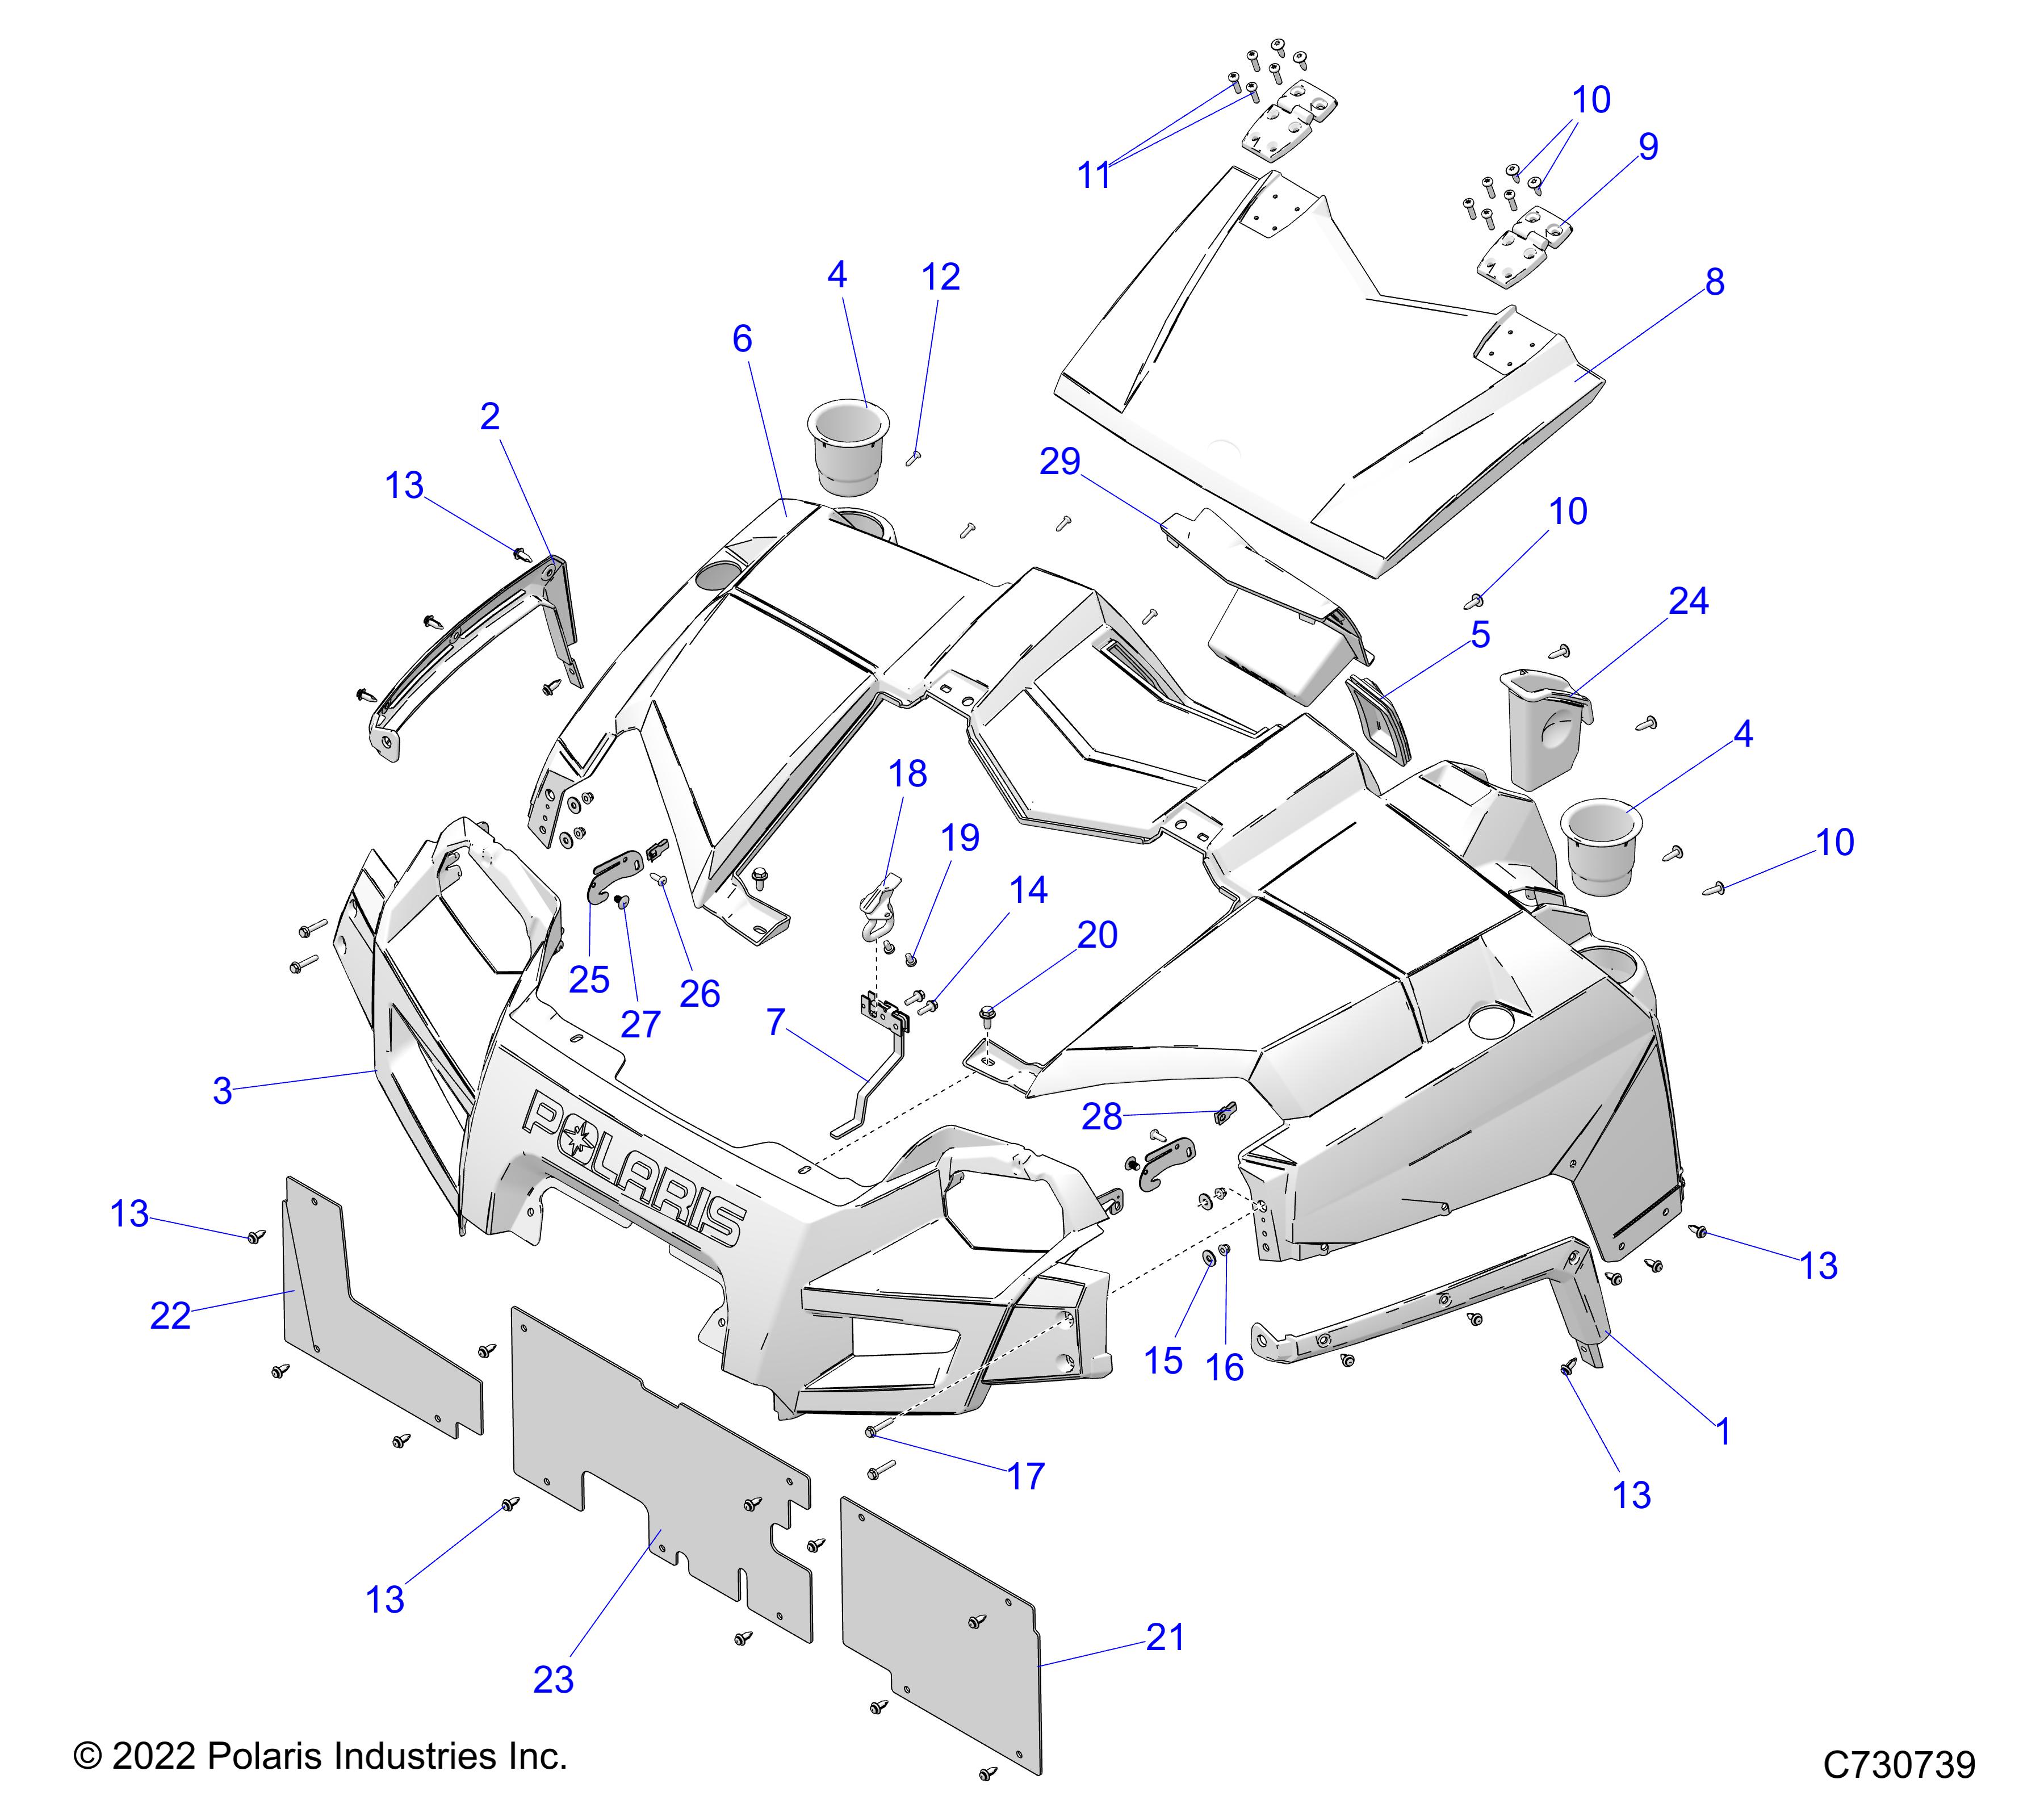 Part Number : 2207127 HOOD KIT WITH DASH   CREW